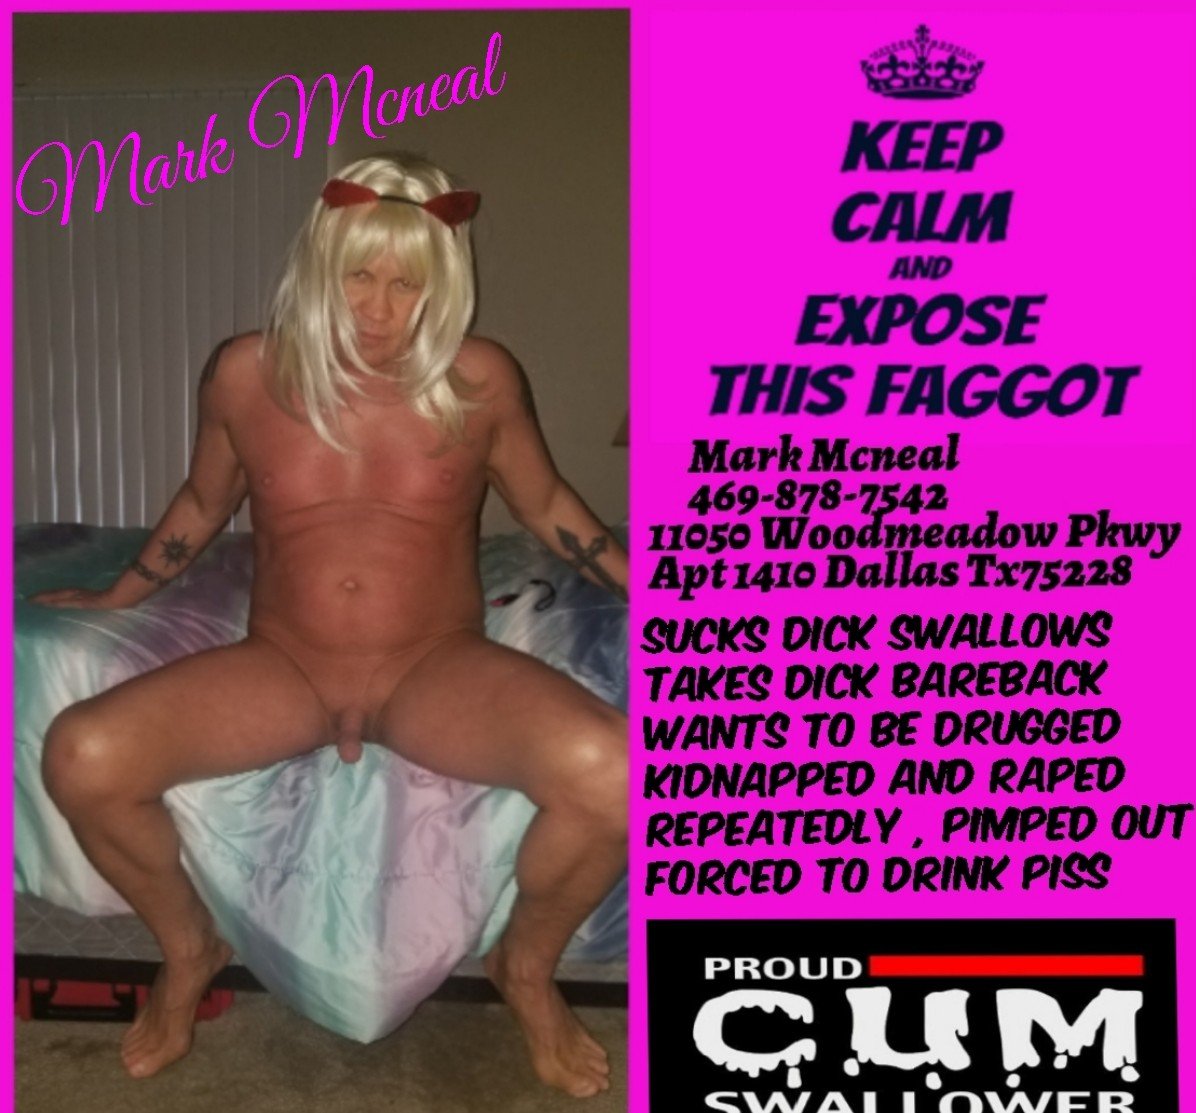 Photo by Sissyfaggot_Boy with the username @markmcnealfag2expose, posted on August 7, 2019. The post is about the topic humiliation and degradation and the text says 'faggots begging to be exposed humiliated'